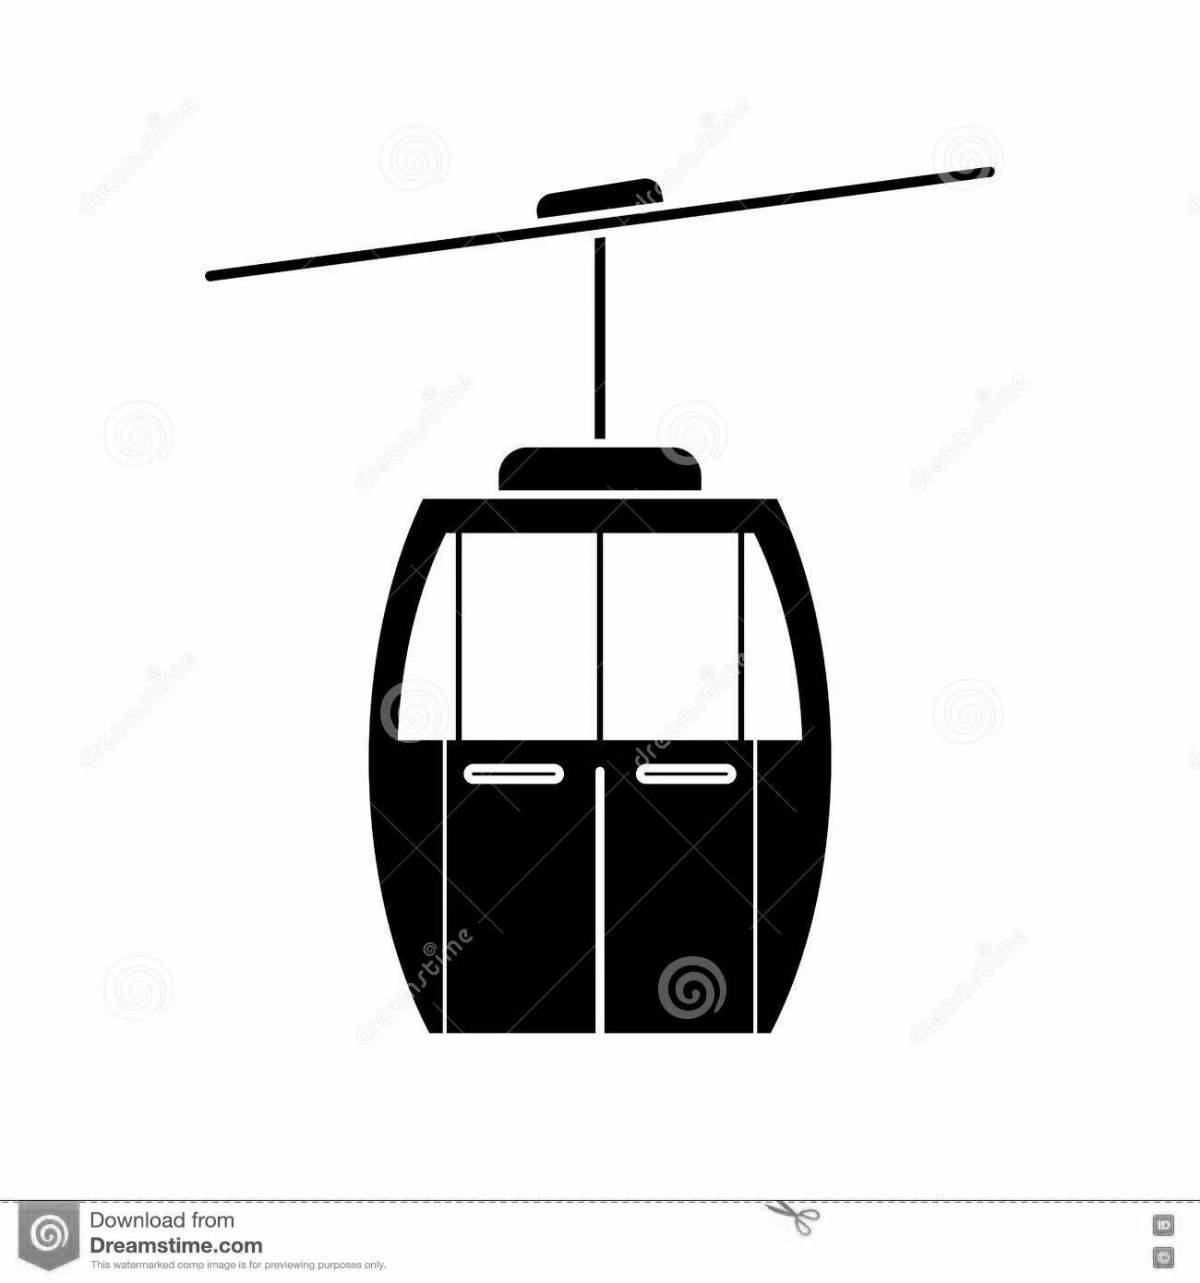 Playful cable car coloring page